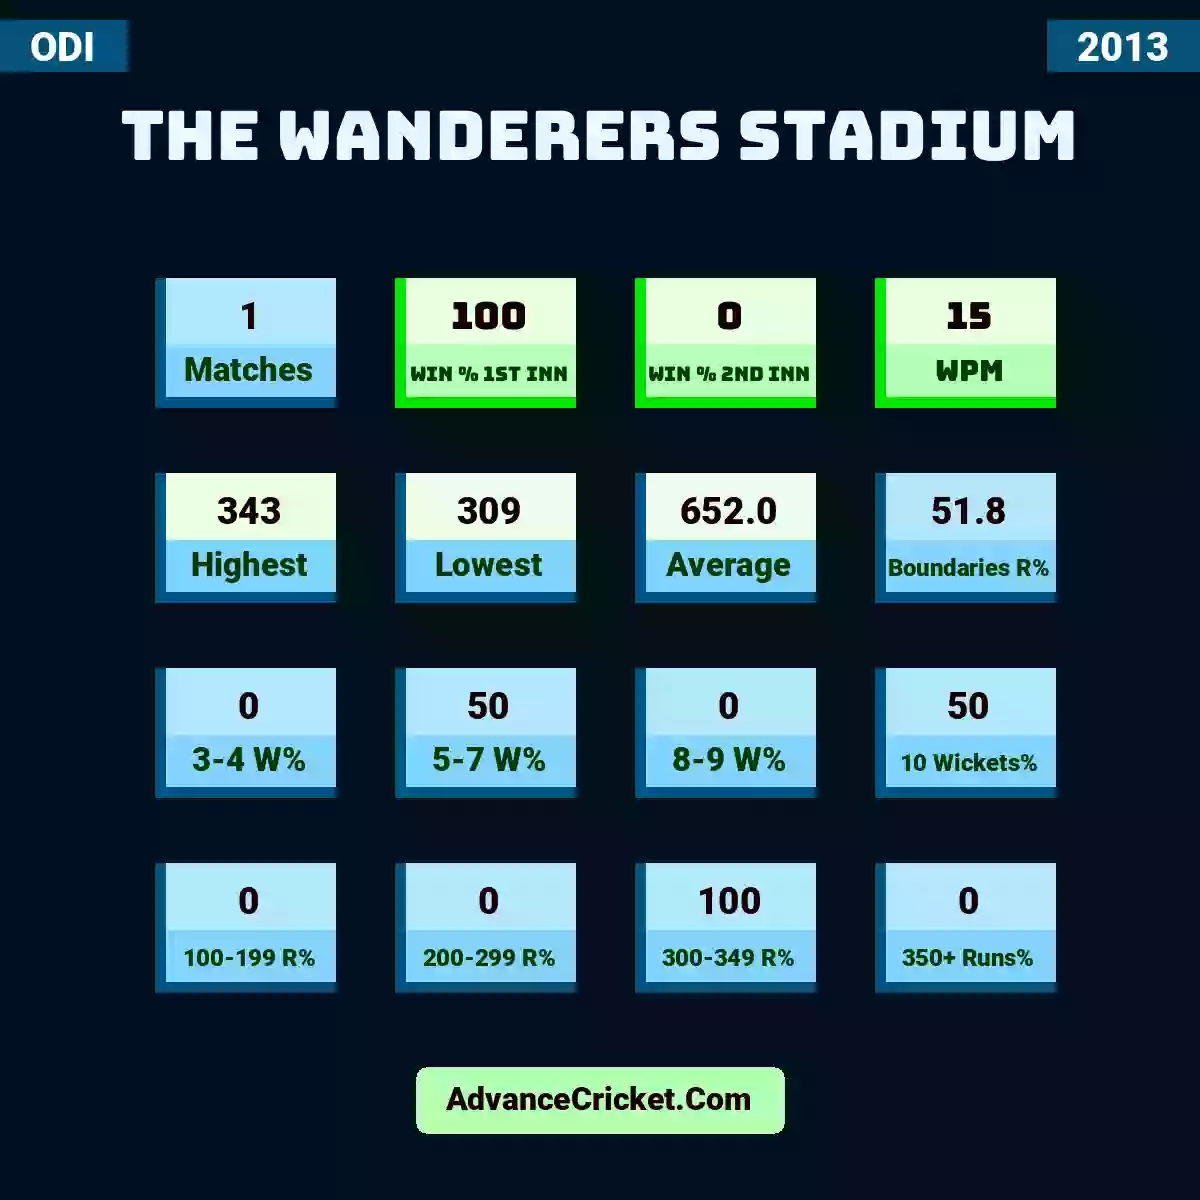 Image showing The Wanderers Stadium with Matches: 1, Win % 1st Inn: 100, Win % 2nd Inn: 0, WPM: 15, Highest: 343, Lowest: 309, Average: 652.0, Boundaries R%: 51.8, 3-4 W%: 0, 5-7 W%: 50, 8-9 W%: 0, 10 Wickets%: 50, 100-199 R%: 0, 200-299 R%: 0, 300-349 R%: 100, 350+ Runs%: 0.